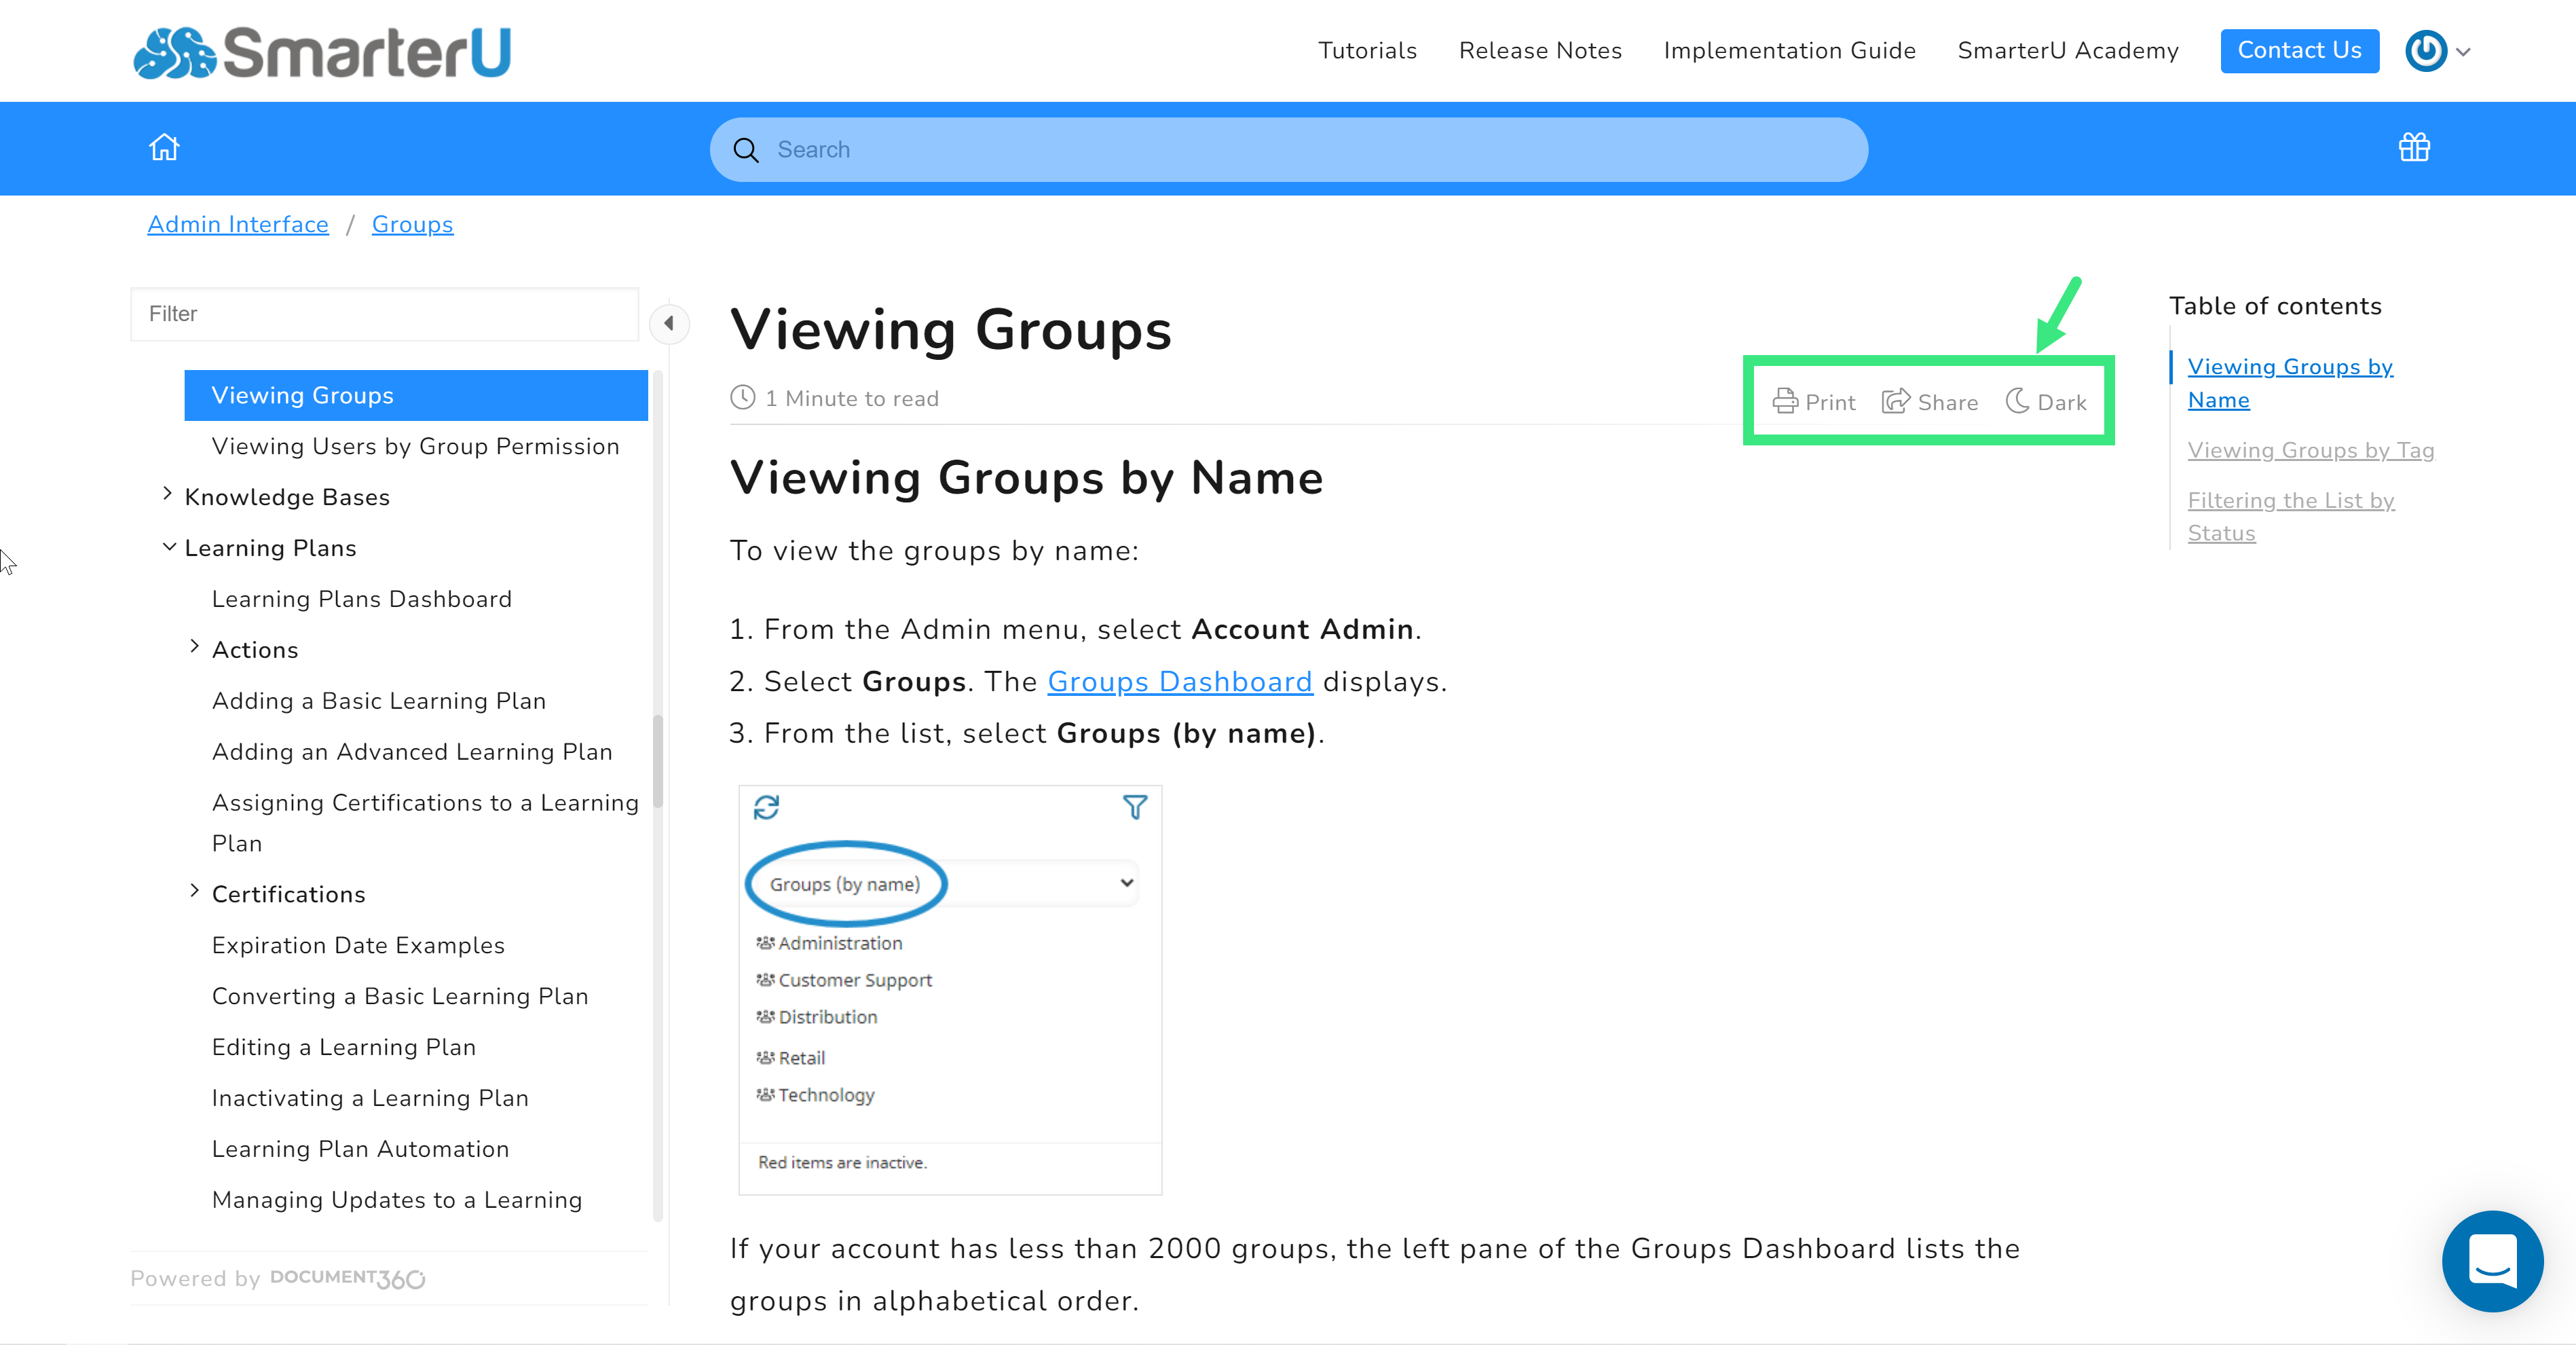 Article Buttons - Viewing Groups 20220628_callout